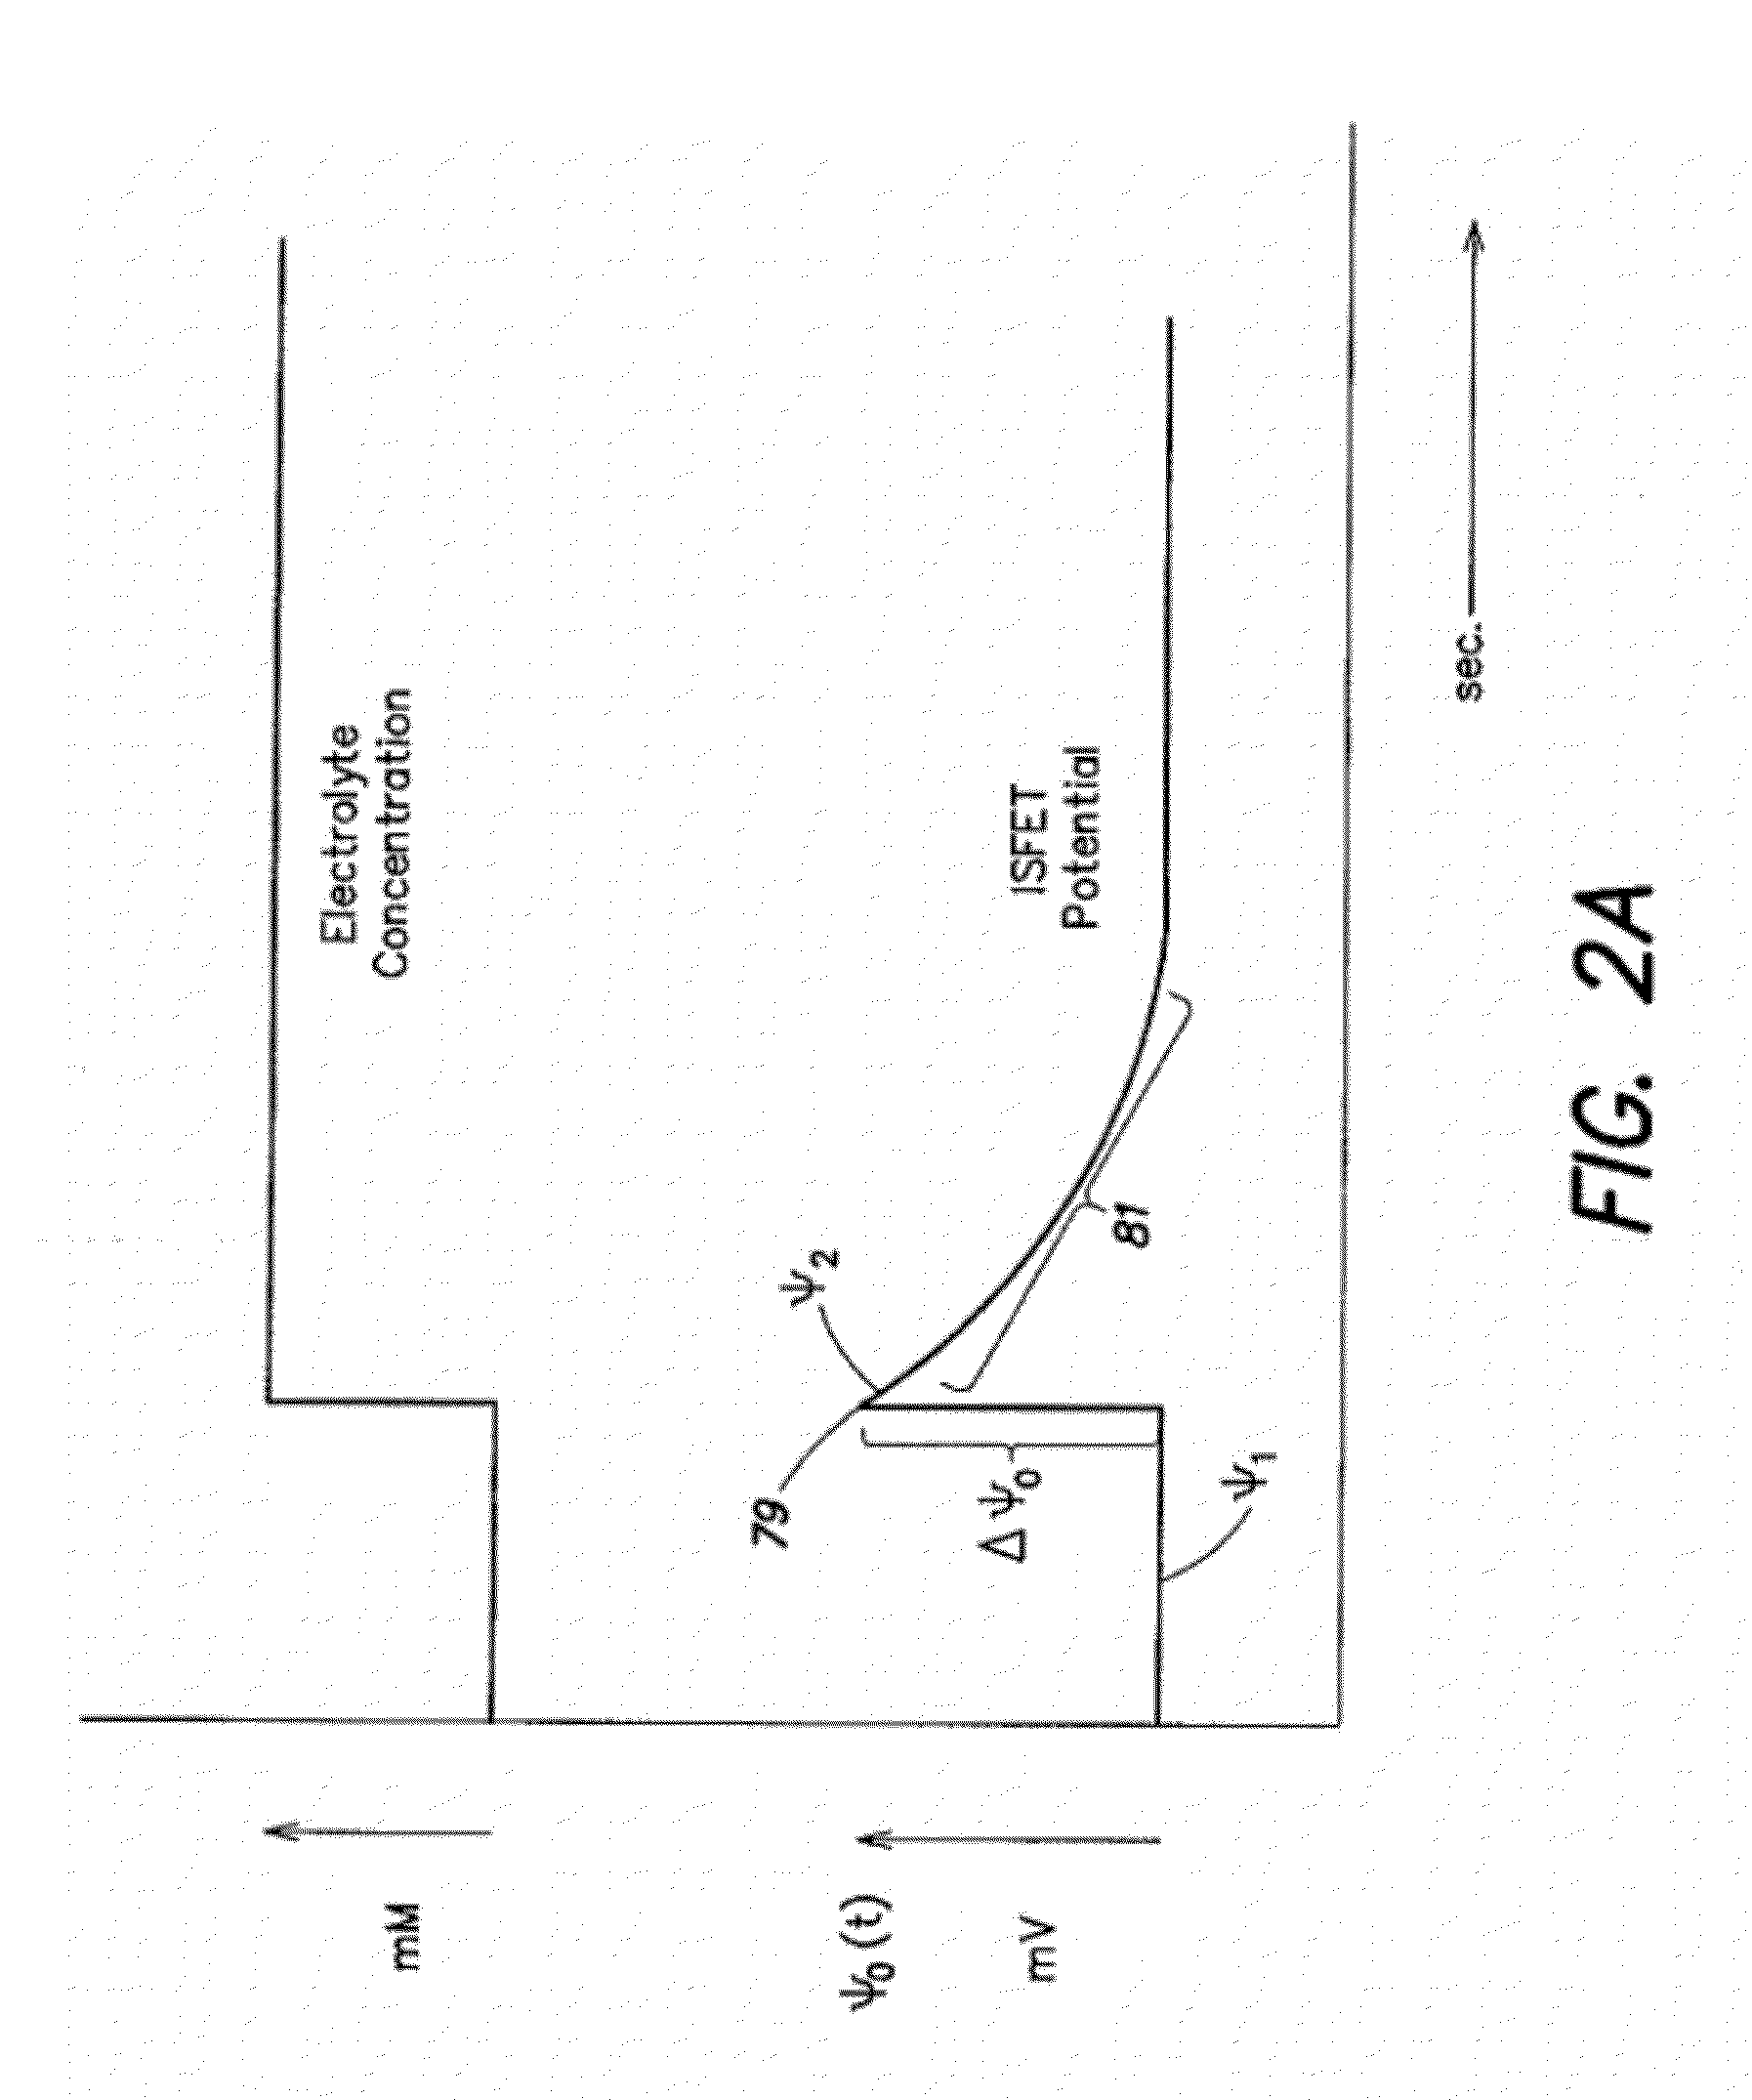 Methods and Apparatus for Detecting Molecular Interactions Using FET Arrays